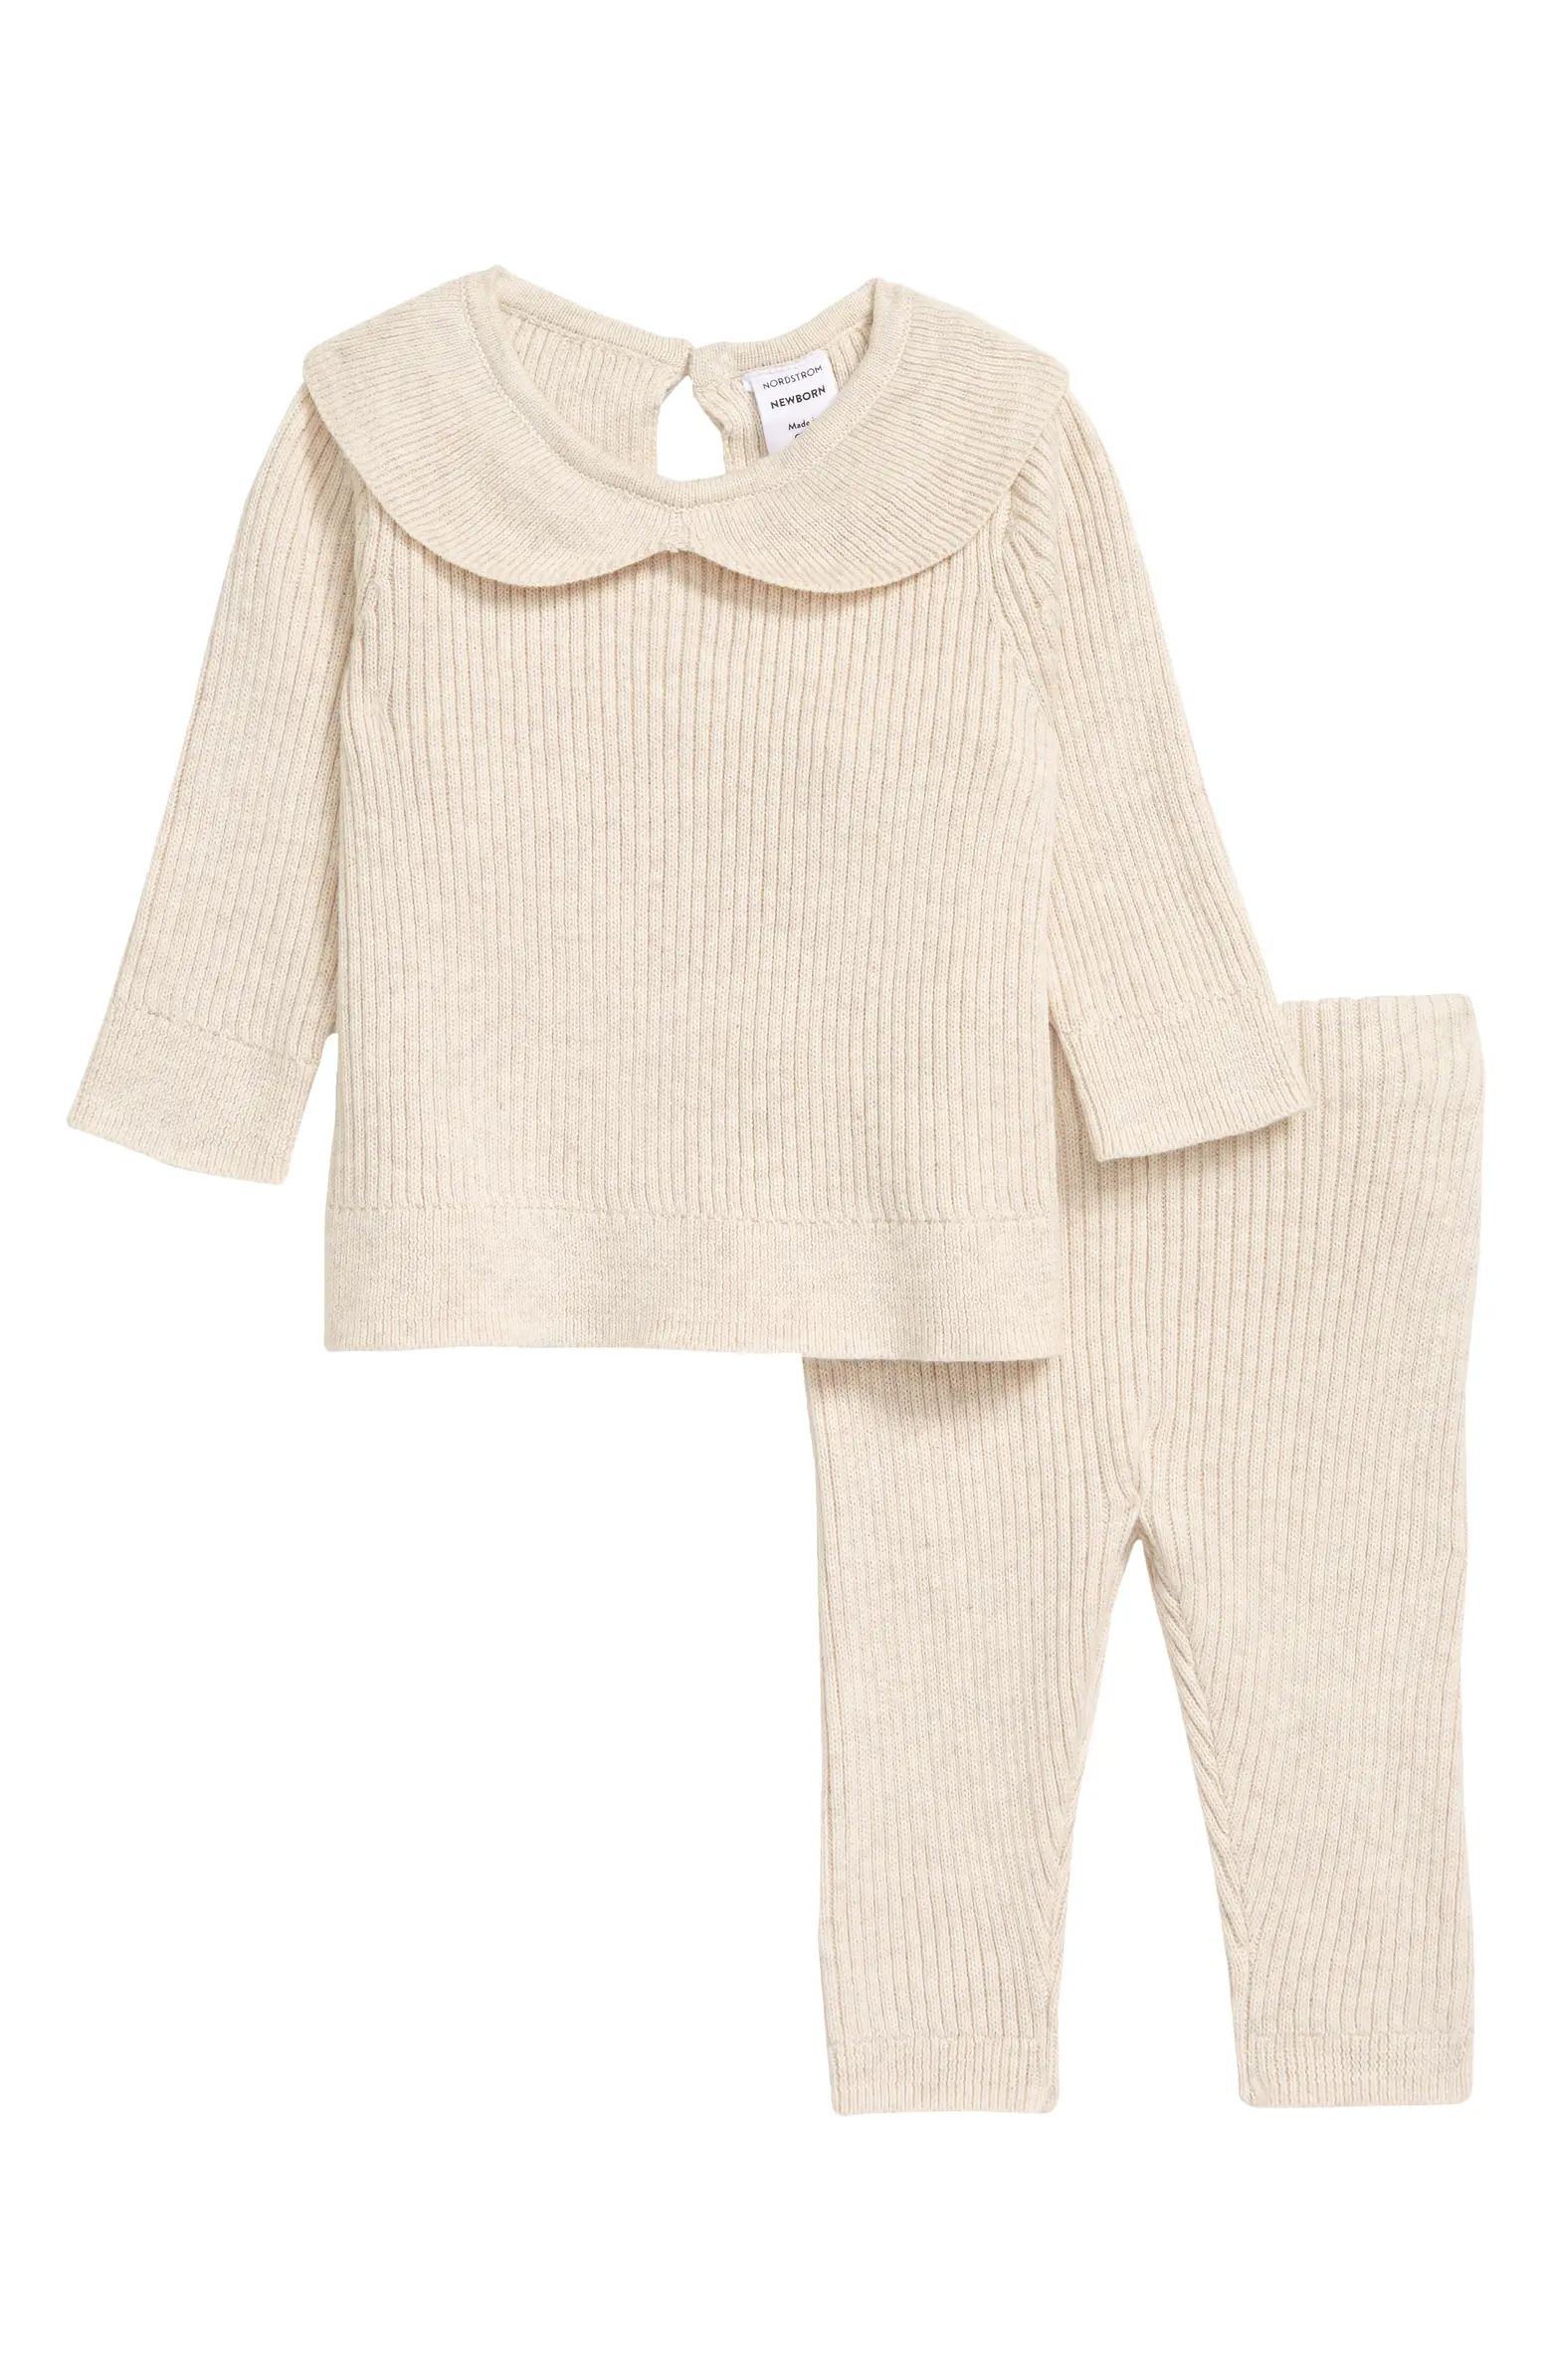 Nordstrom Ribbed Cotton Sweater and Leggings Set | Nordstrom | Nordstrom